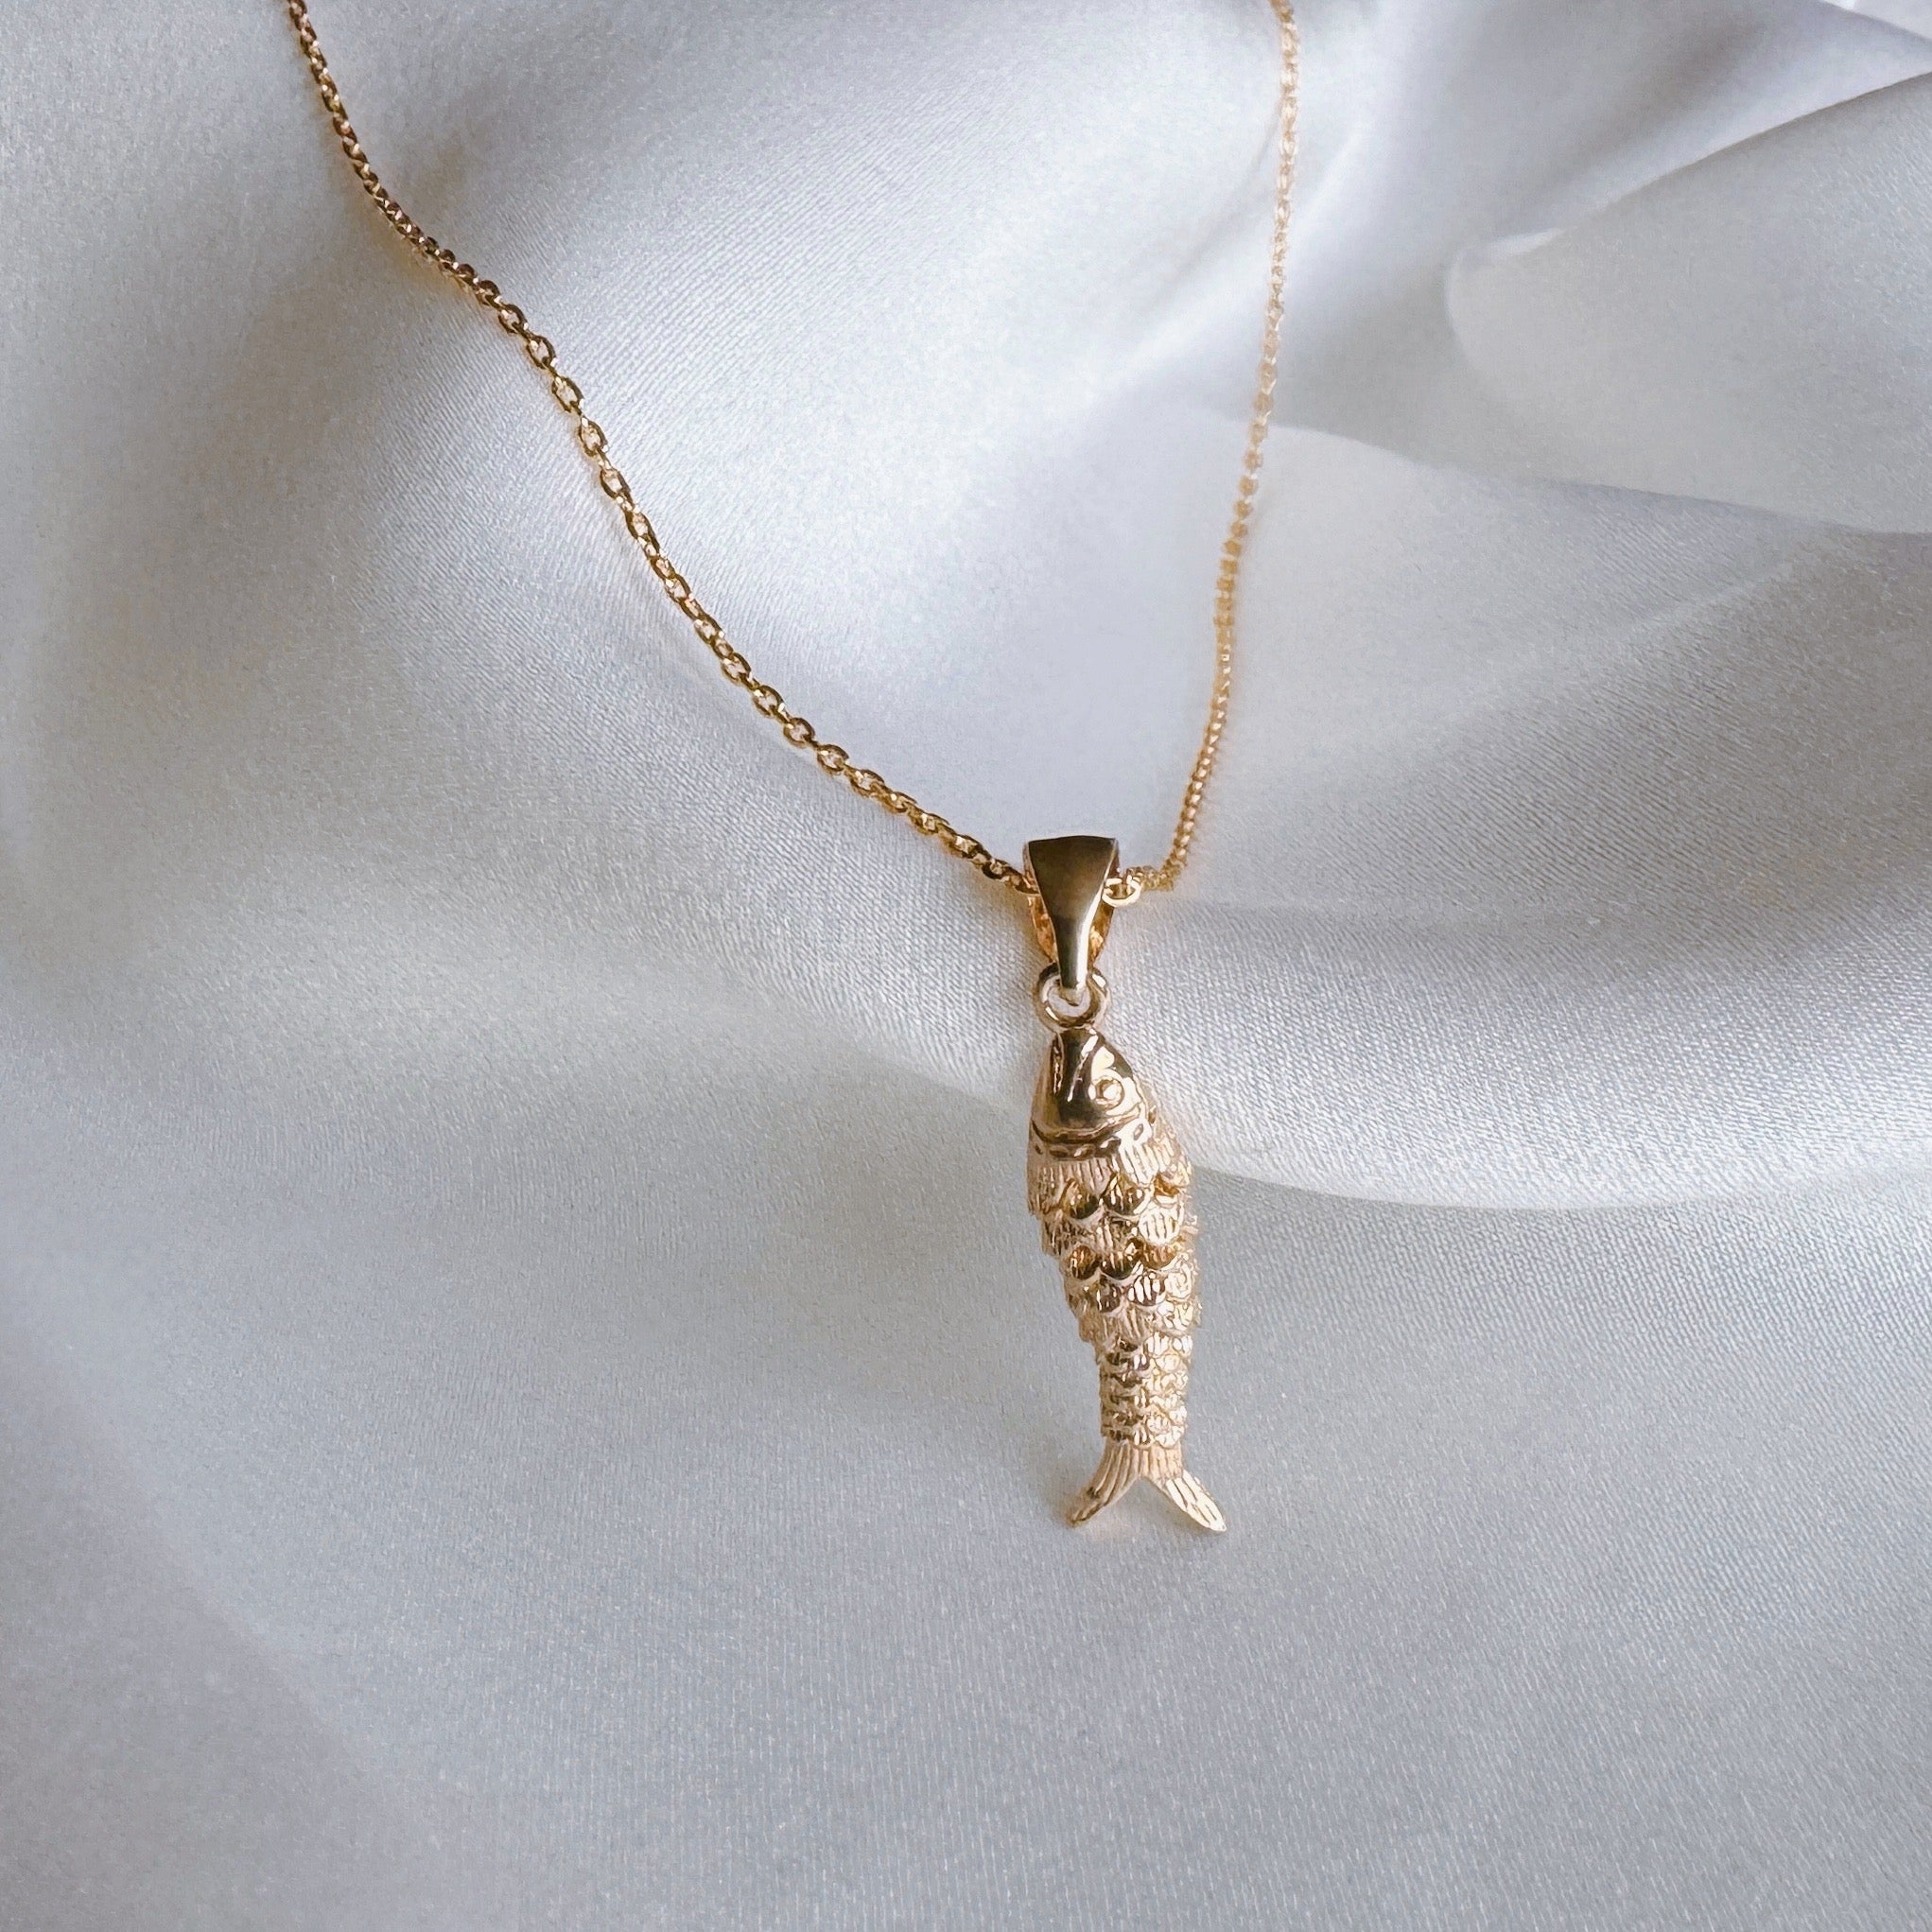 Gold-plated “articulated fish” necklace